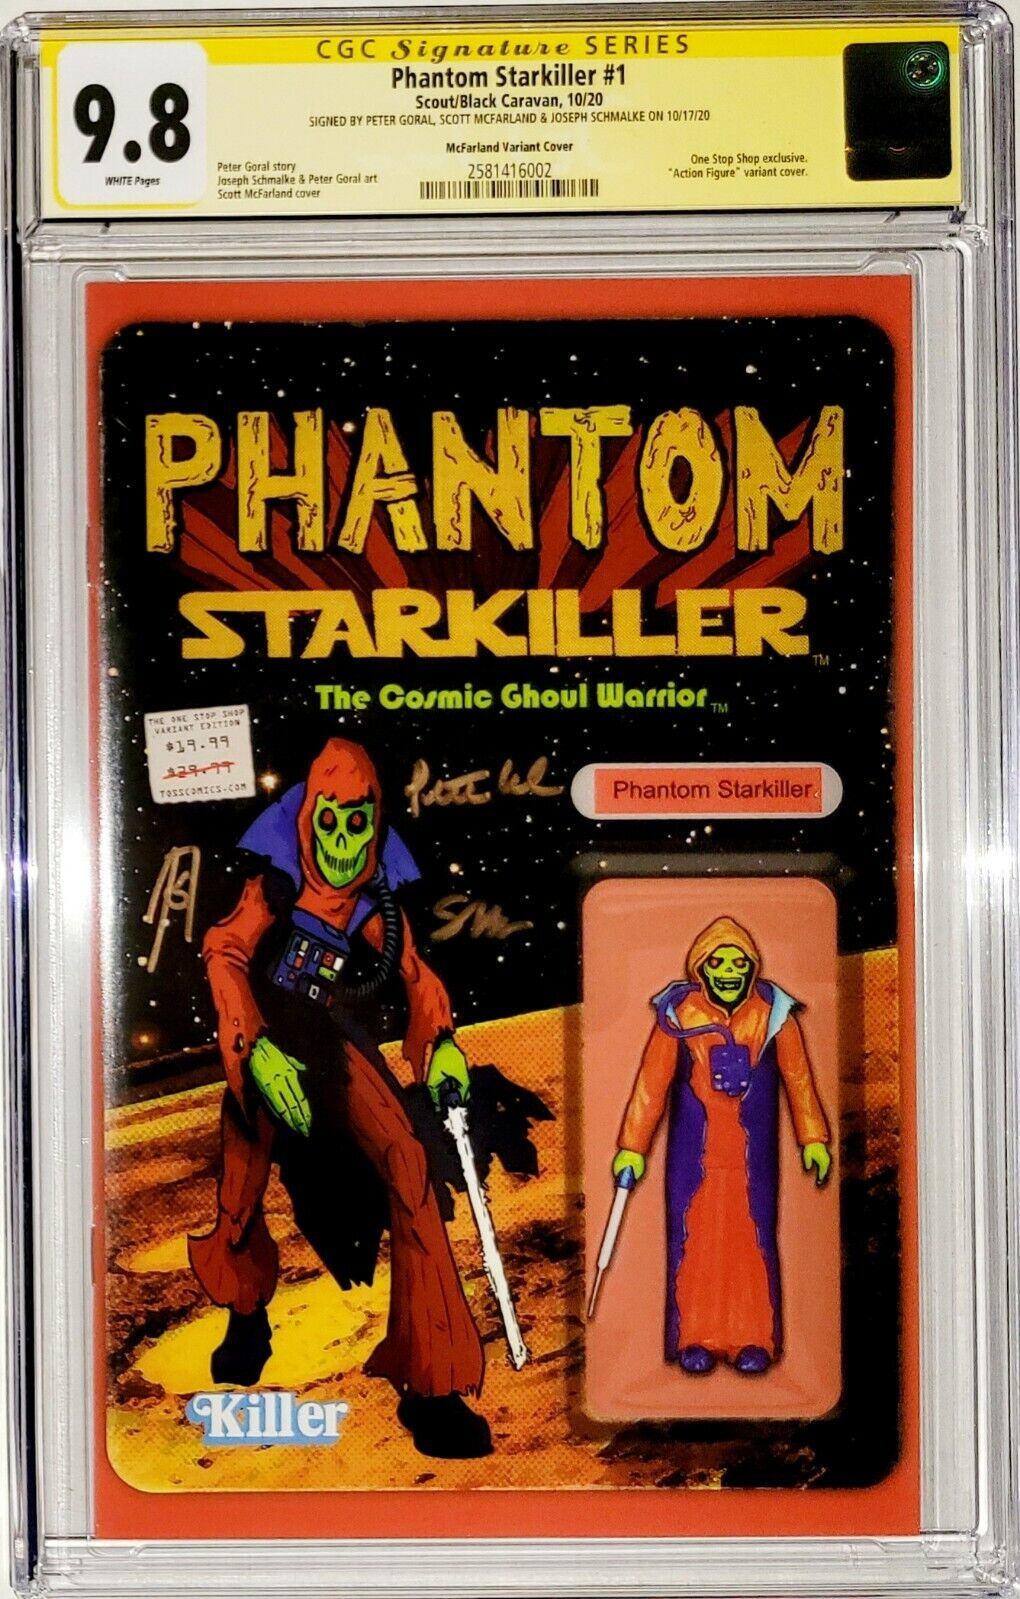 Phantom Starkiller #1 CGC 9.8 SS (Scout 2020) Signed 3x Action Figure Variant